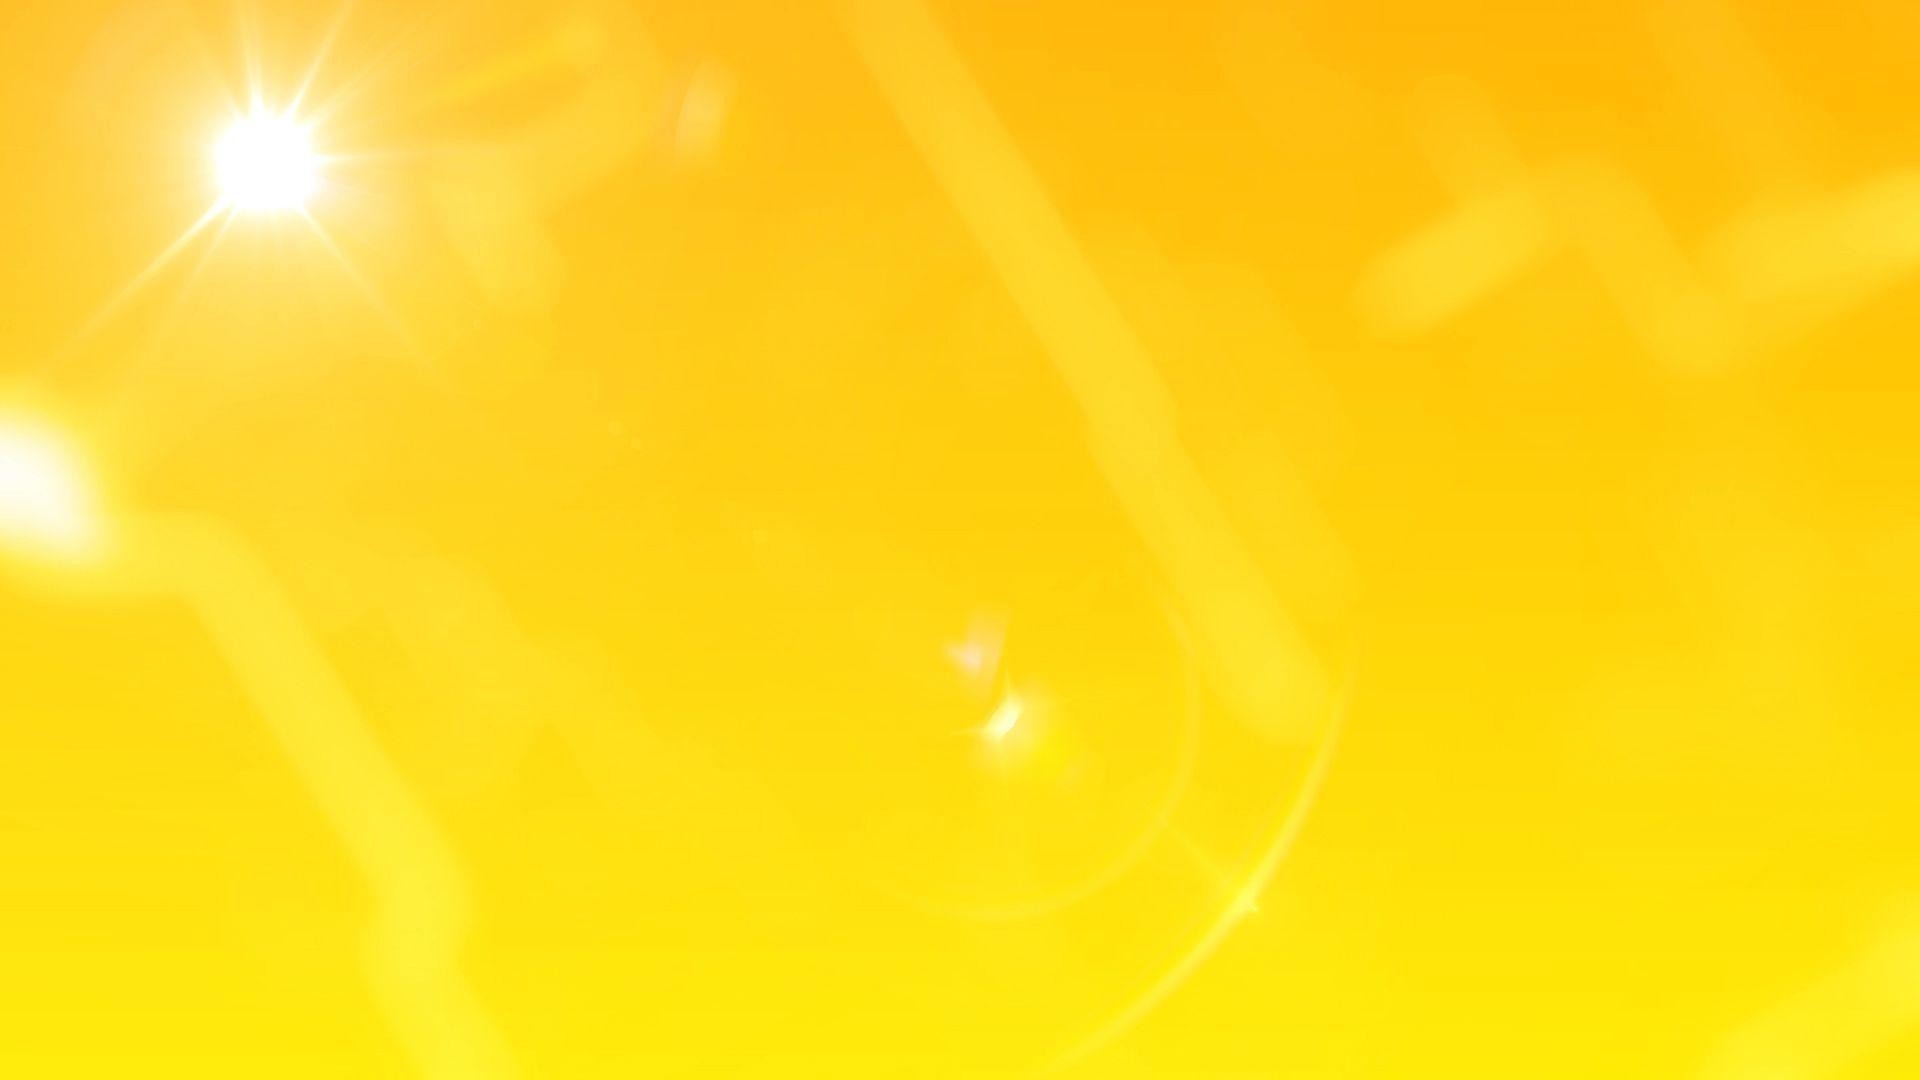 1920x1080 Wallpapers For > Bright Yellow Background